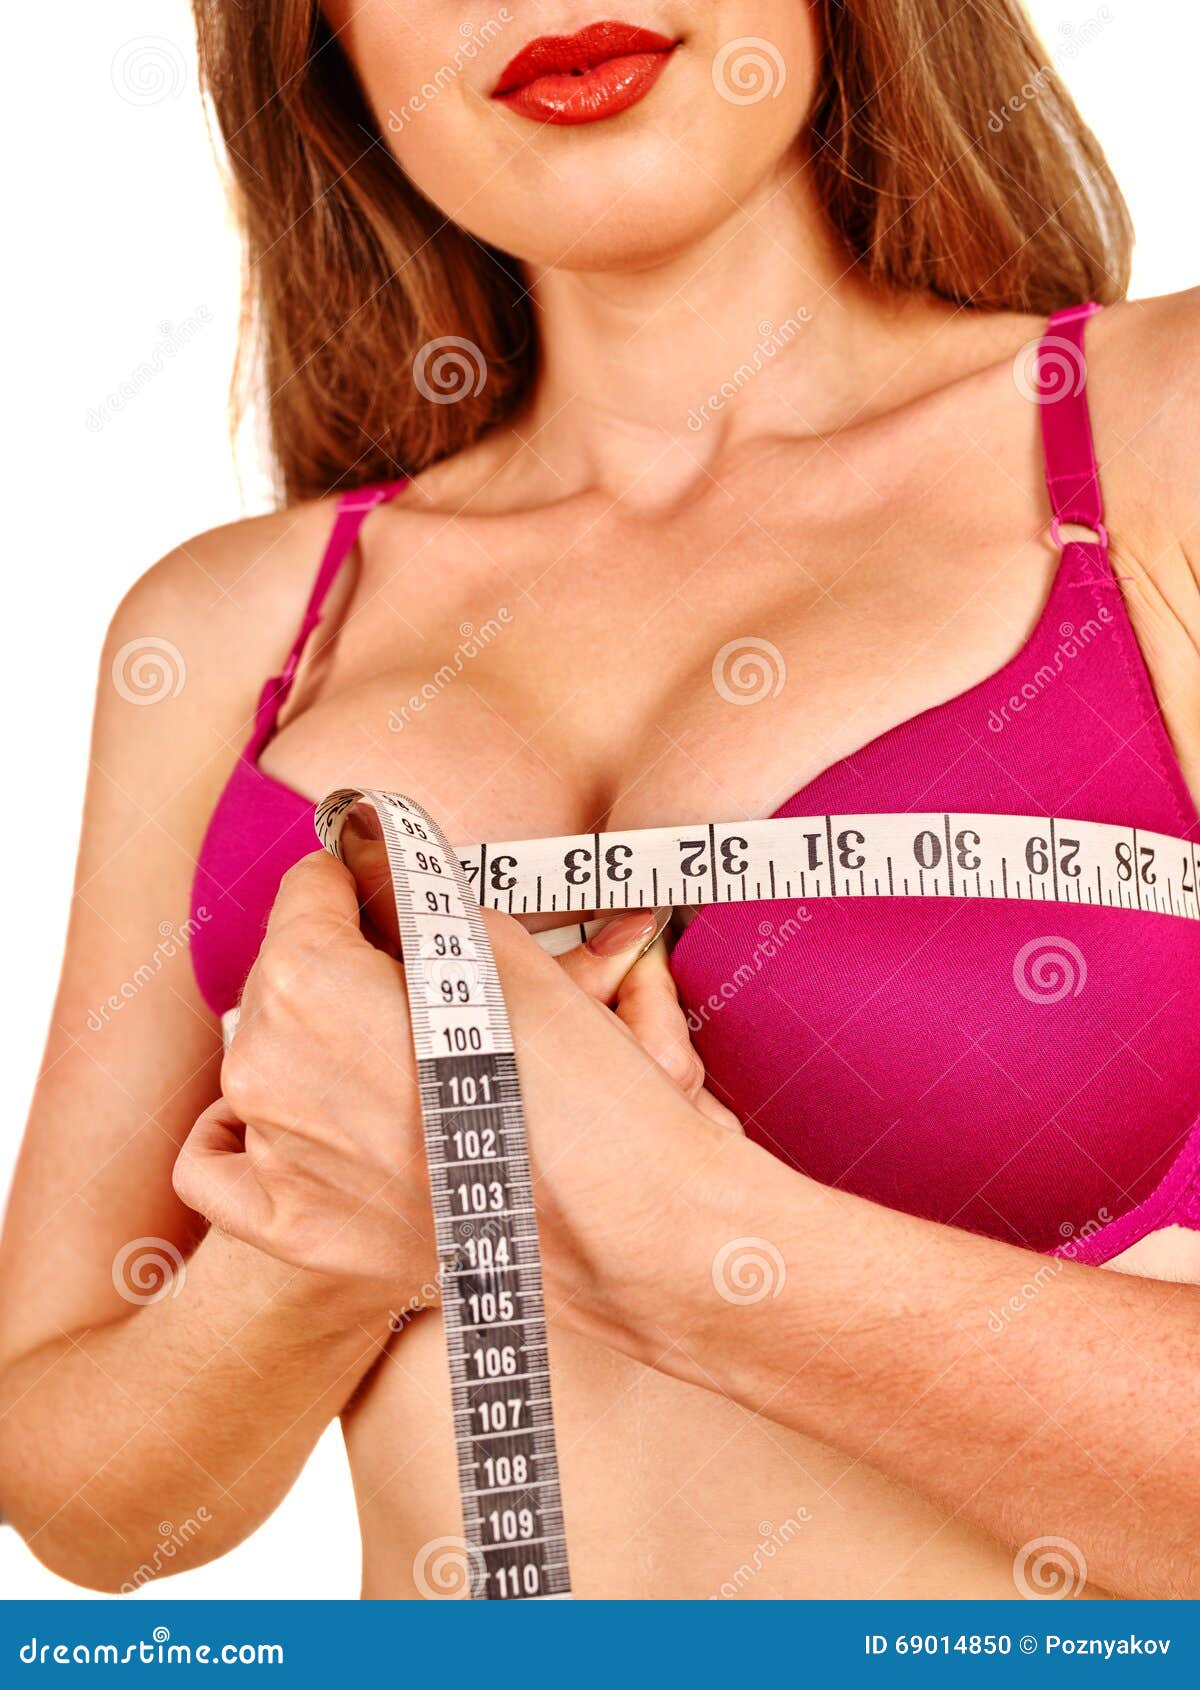 Girl in Lingerie Measures Her Breast Measuring Tape. Stock Photo - Image of  figure, erotic: 69014850